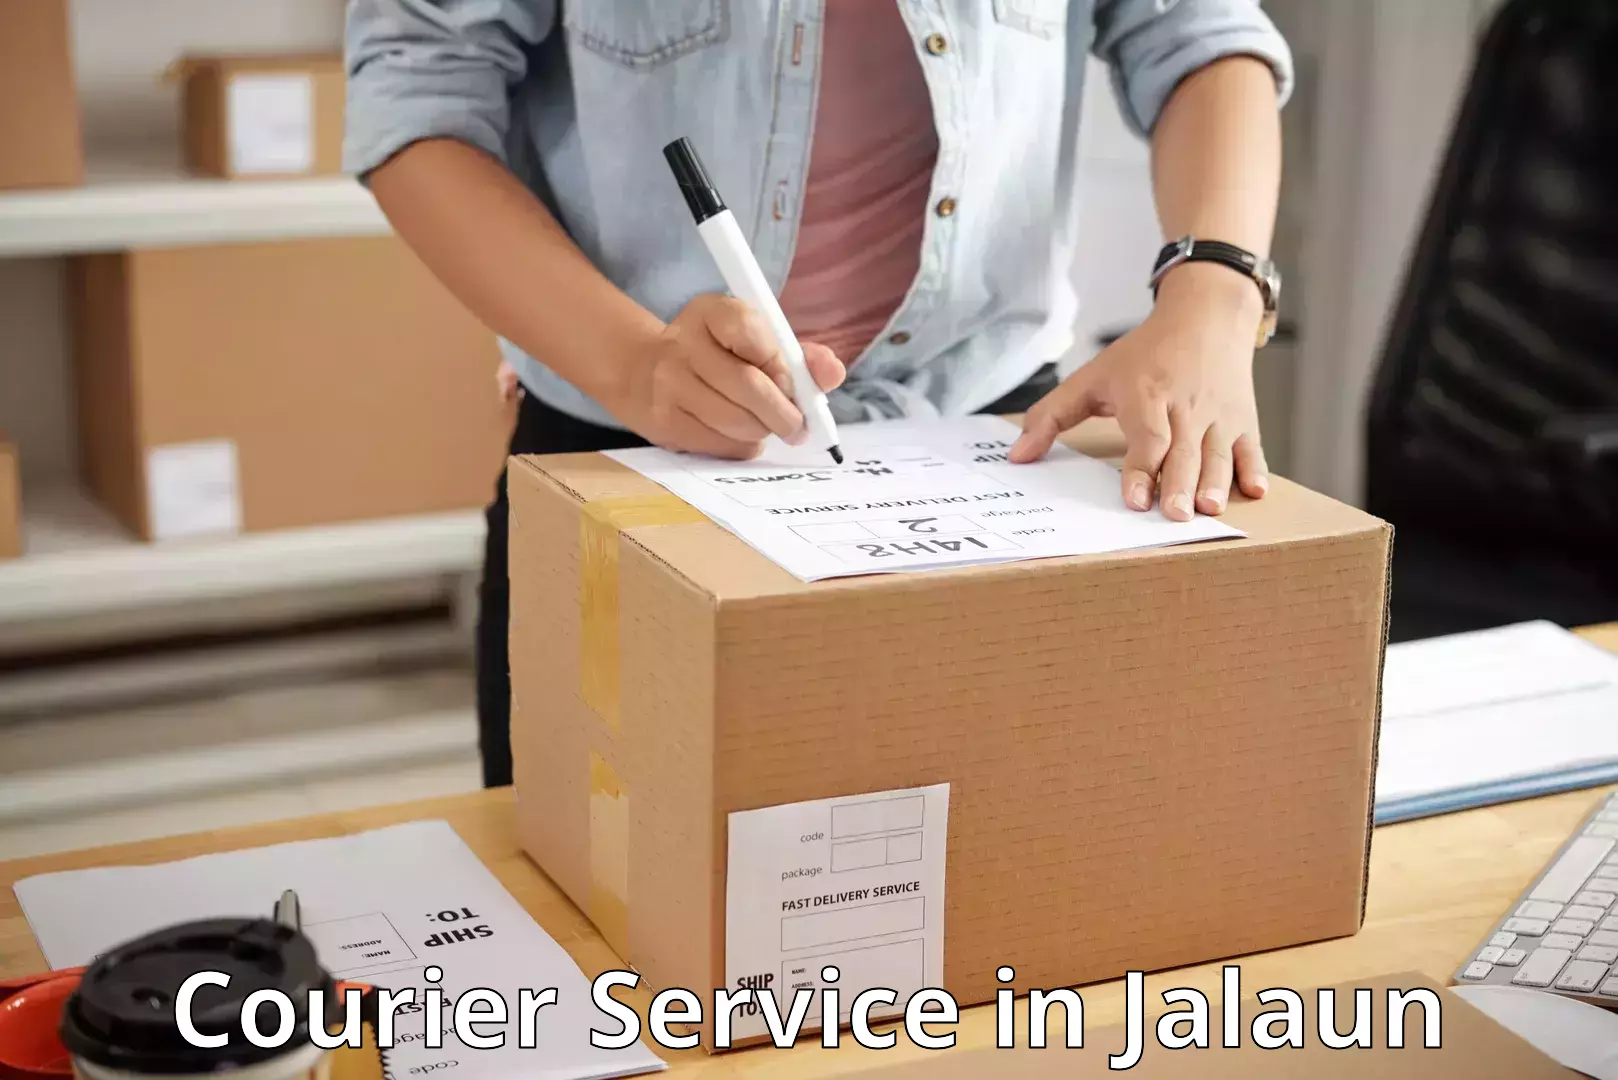 Specialized courier services in Jalaun